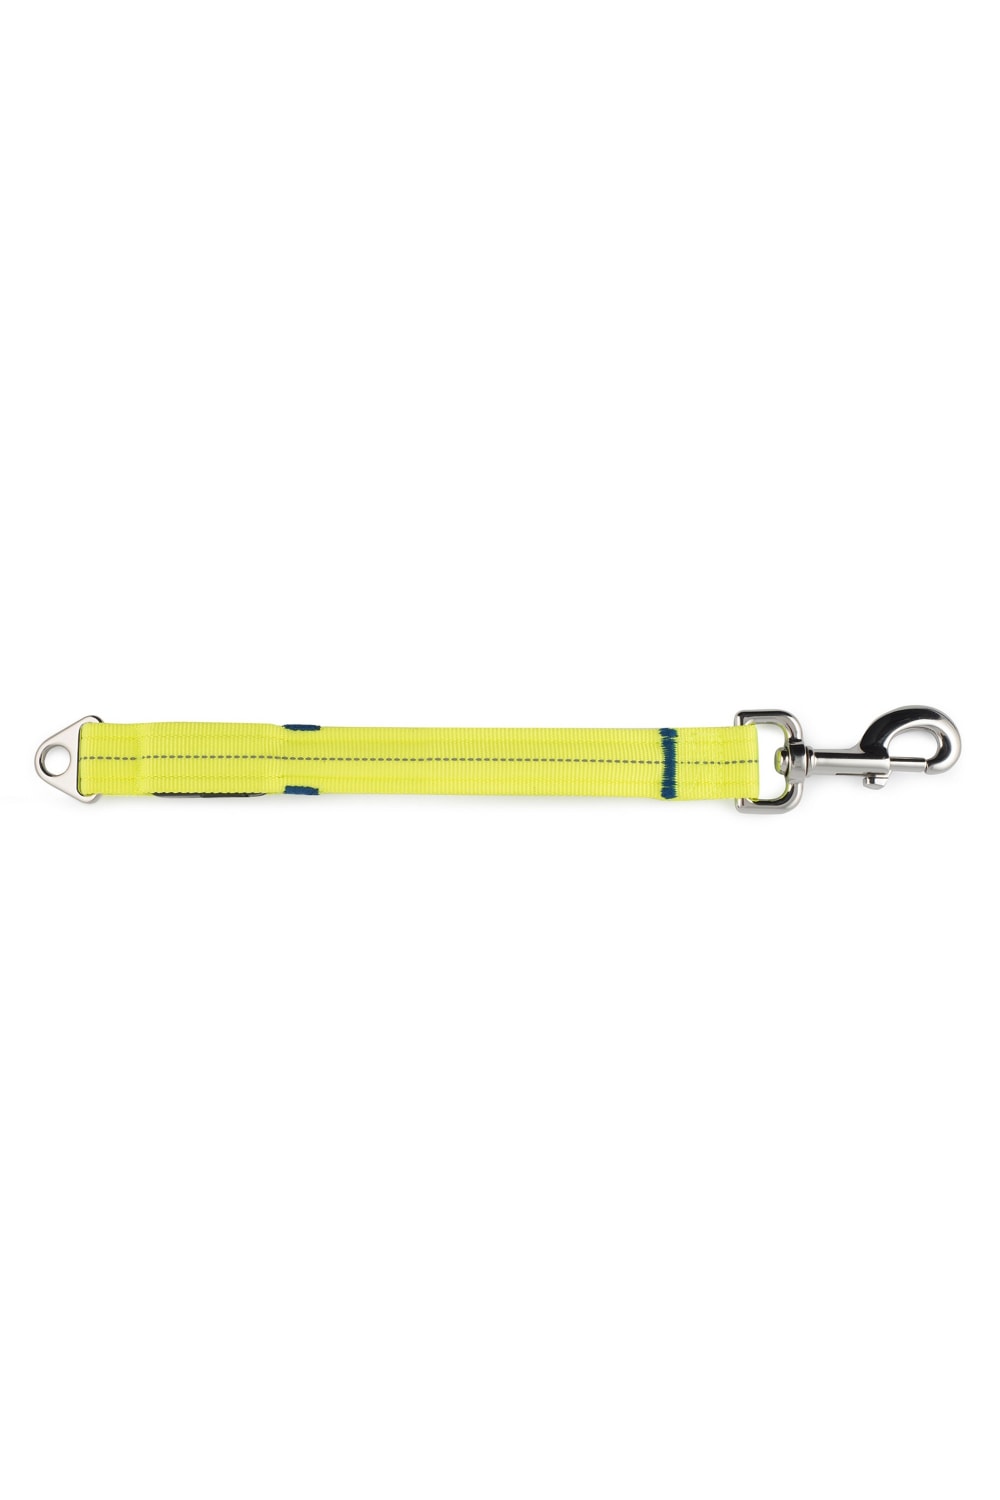 Ancol Pet Products Hi-Vis USB Flashing Lead Attachment (Yellow) (One Size)